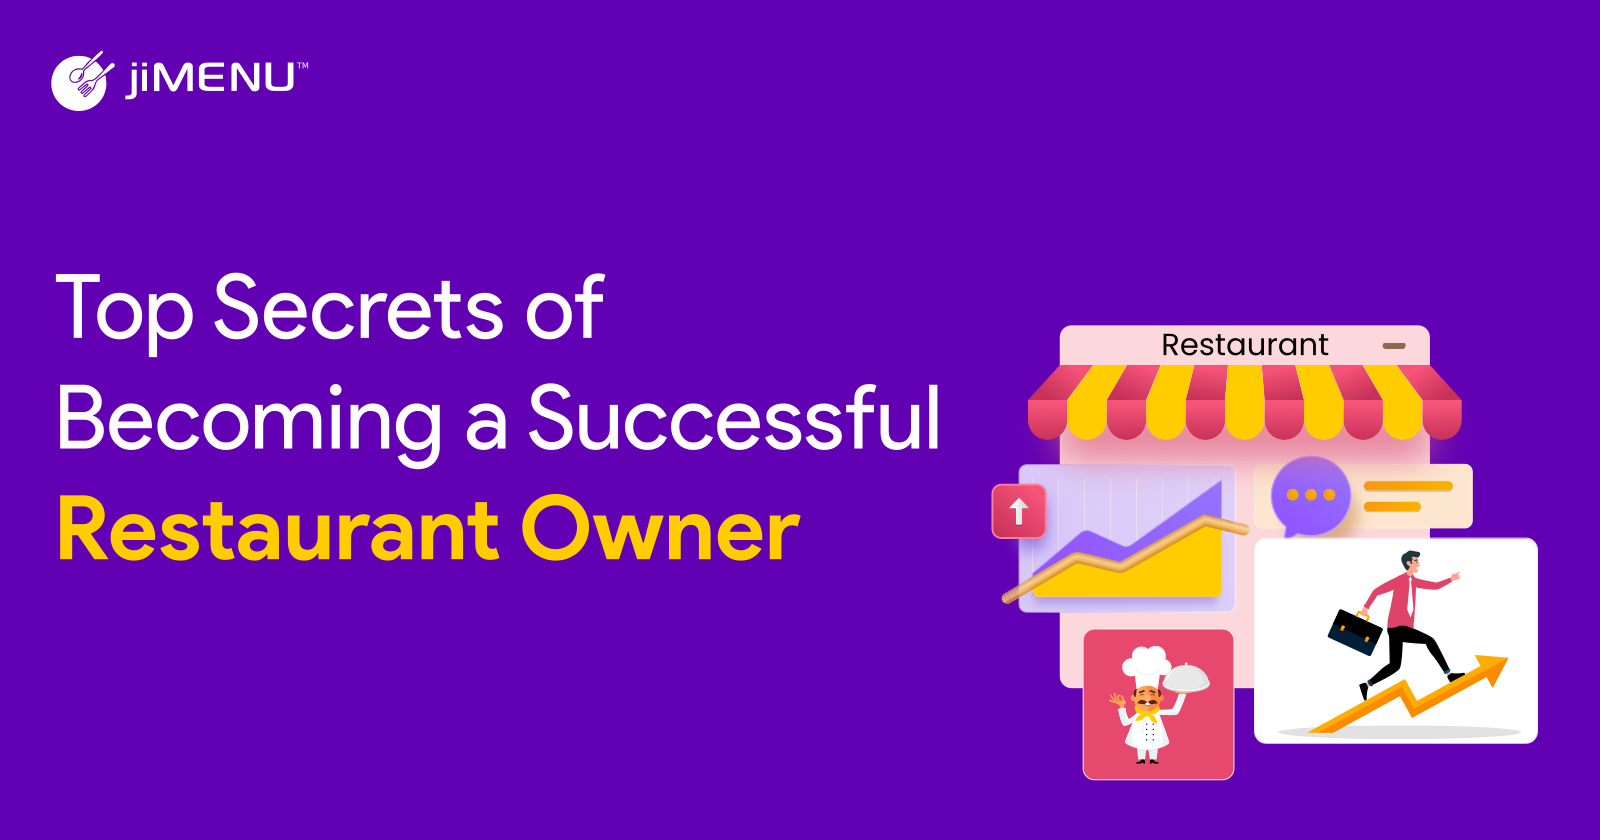 Top Secrets Of Becoming A Successful Restaurant Owner